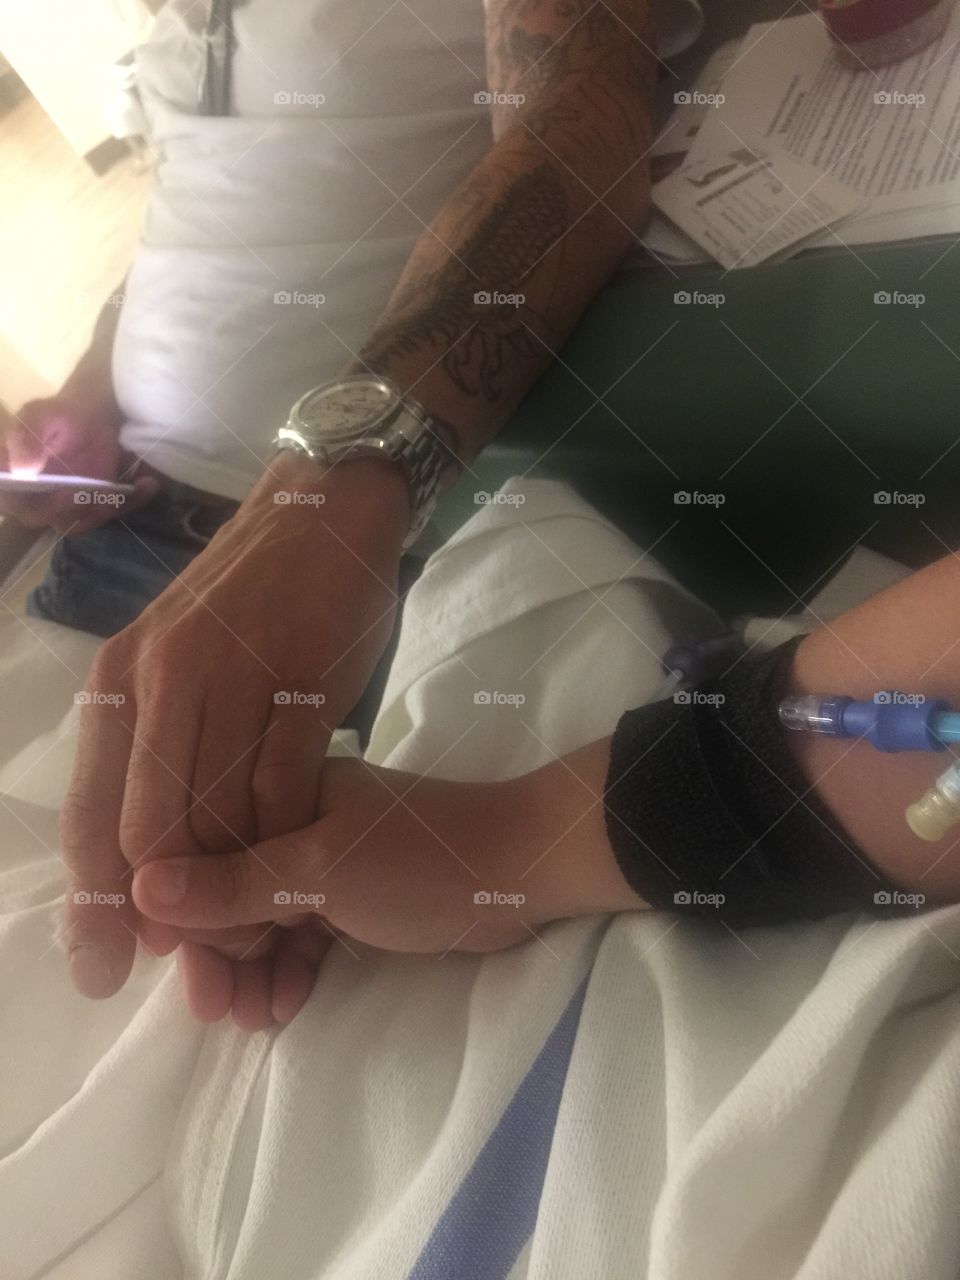 Holding my husband’s hand during chemo